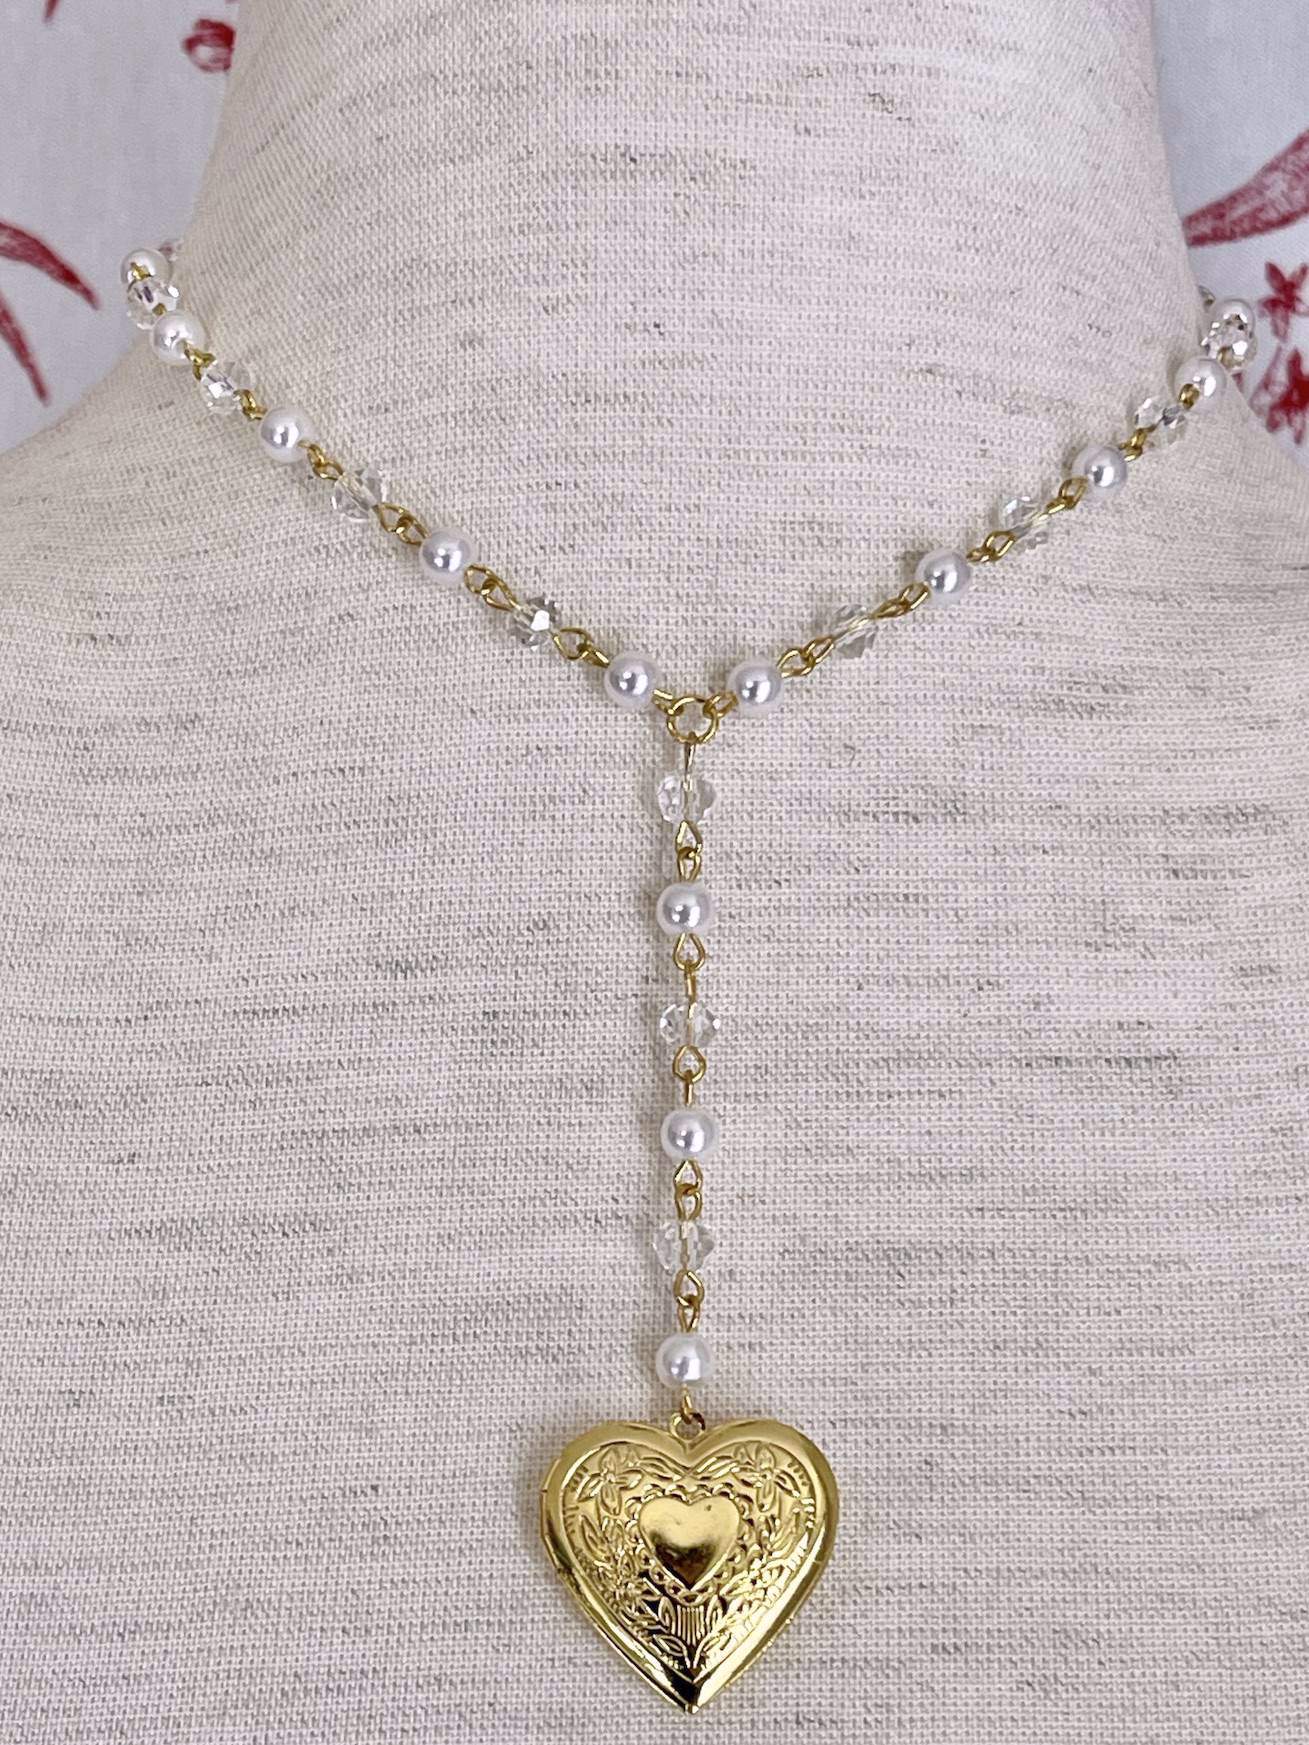 A Historically Inspired Romantic Era Heart Shaped Locket Necklace in Gold with pearl chain. Regency, Rococo, Victorian, Edwardian era jewelry.